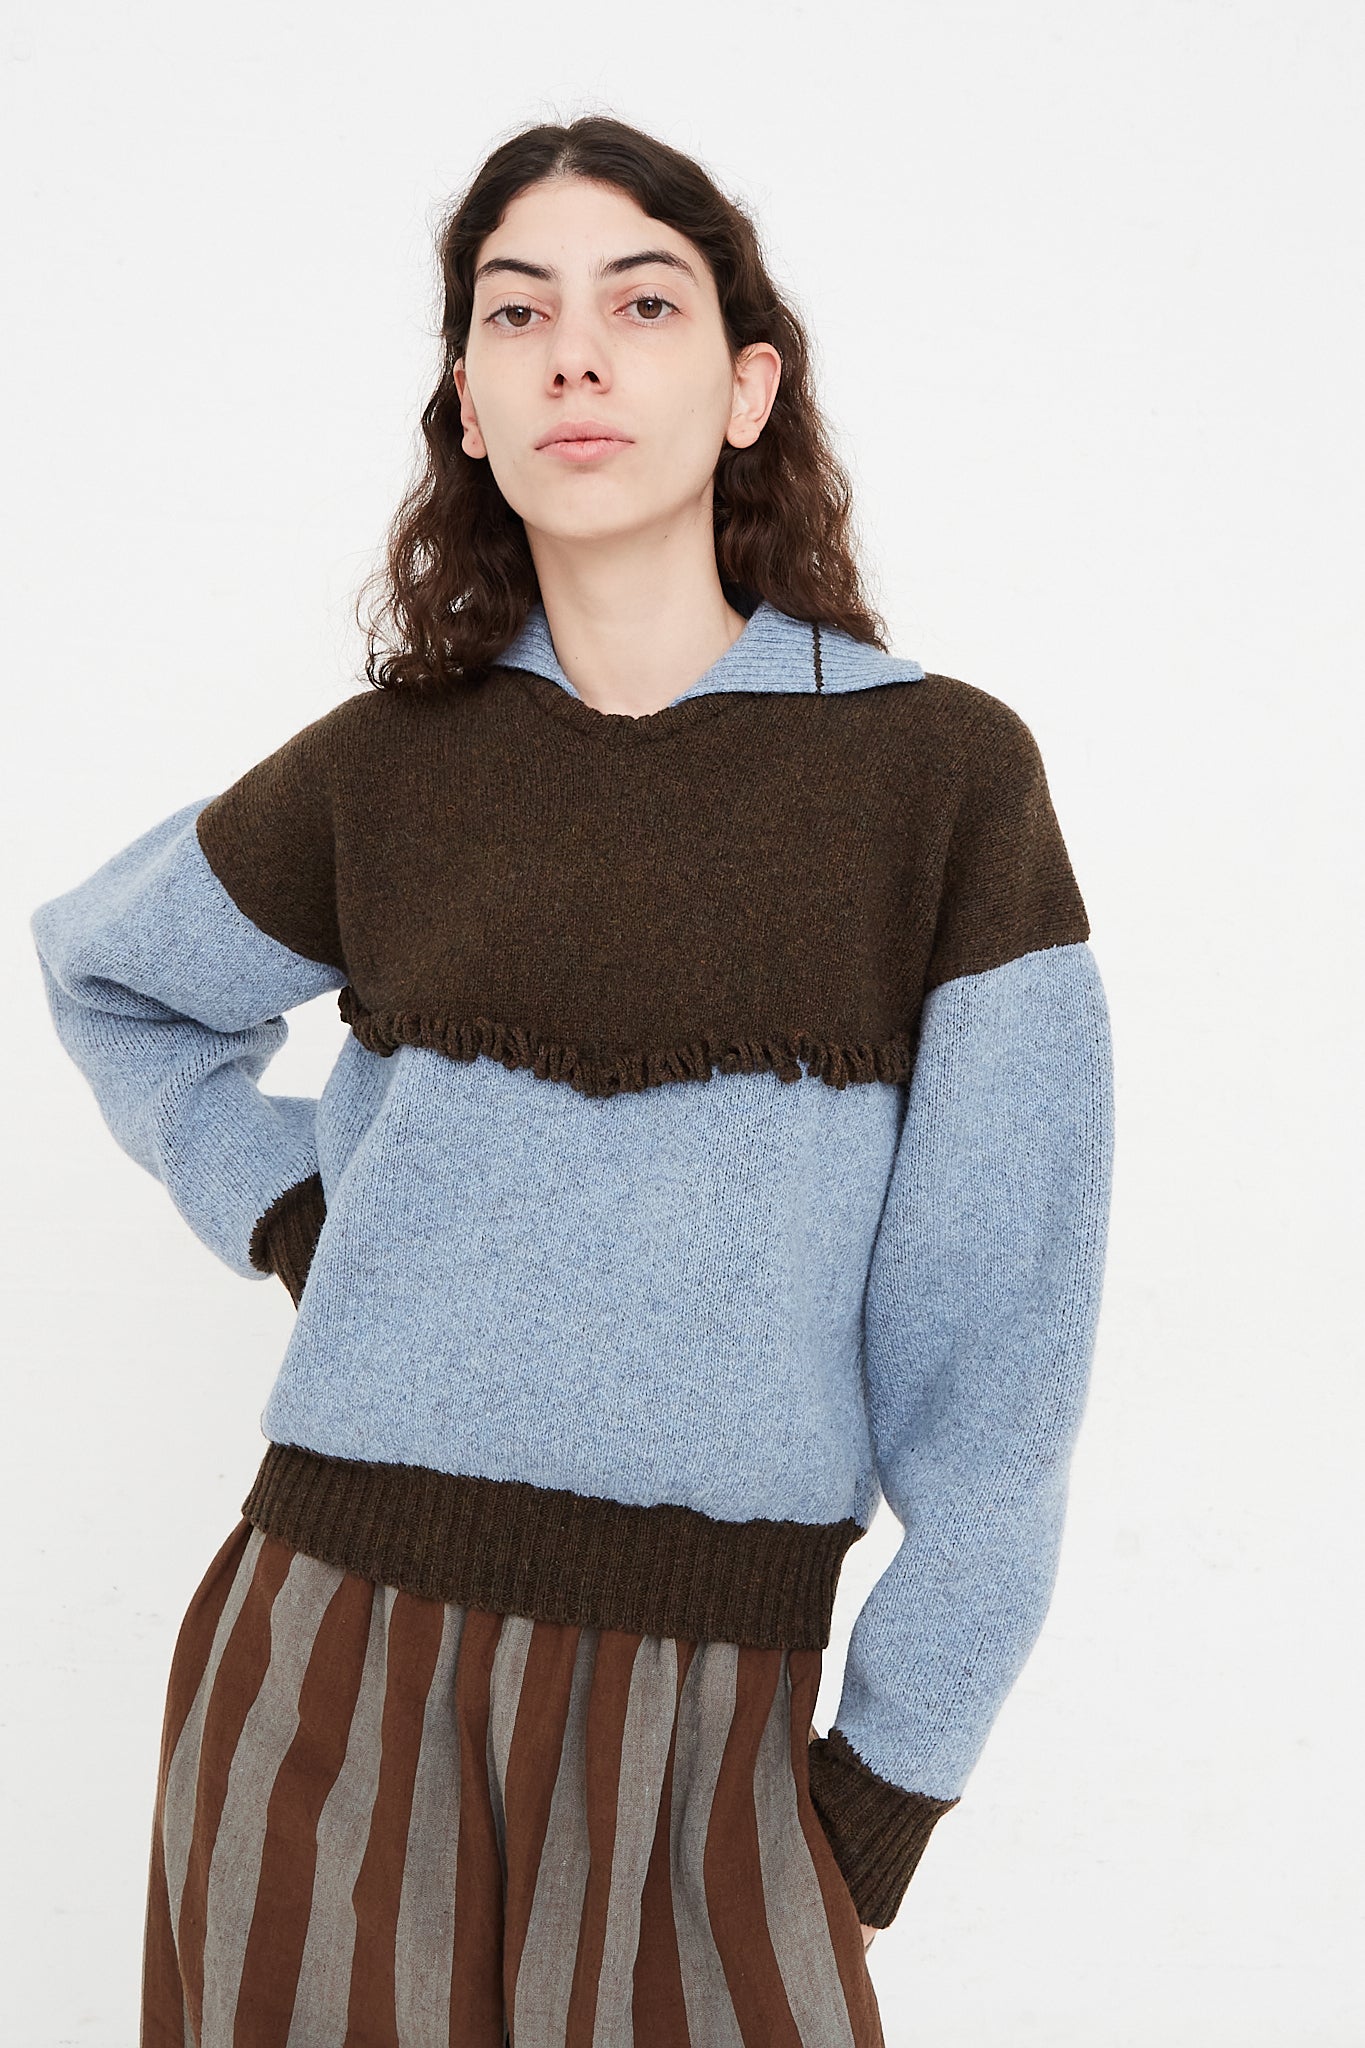 A model wearing a knit pullover sweater in a British wool. Features a polo collar with dropped shoulders and contrast color on top, cuffs and hem. Front view and up close. Showcasing sleeves, details and pants. One hand in pocket. Designed by Cawley - Oroboro Store